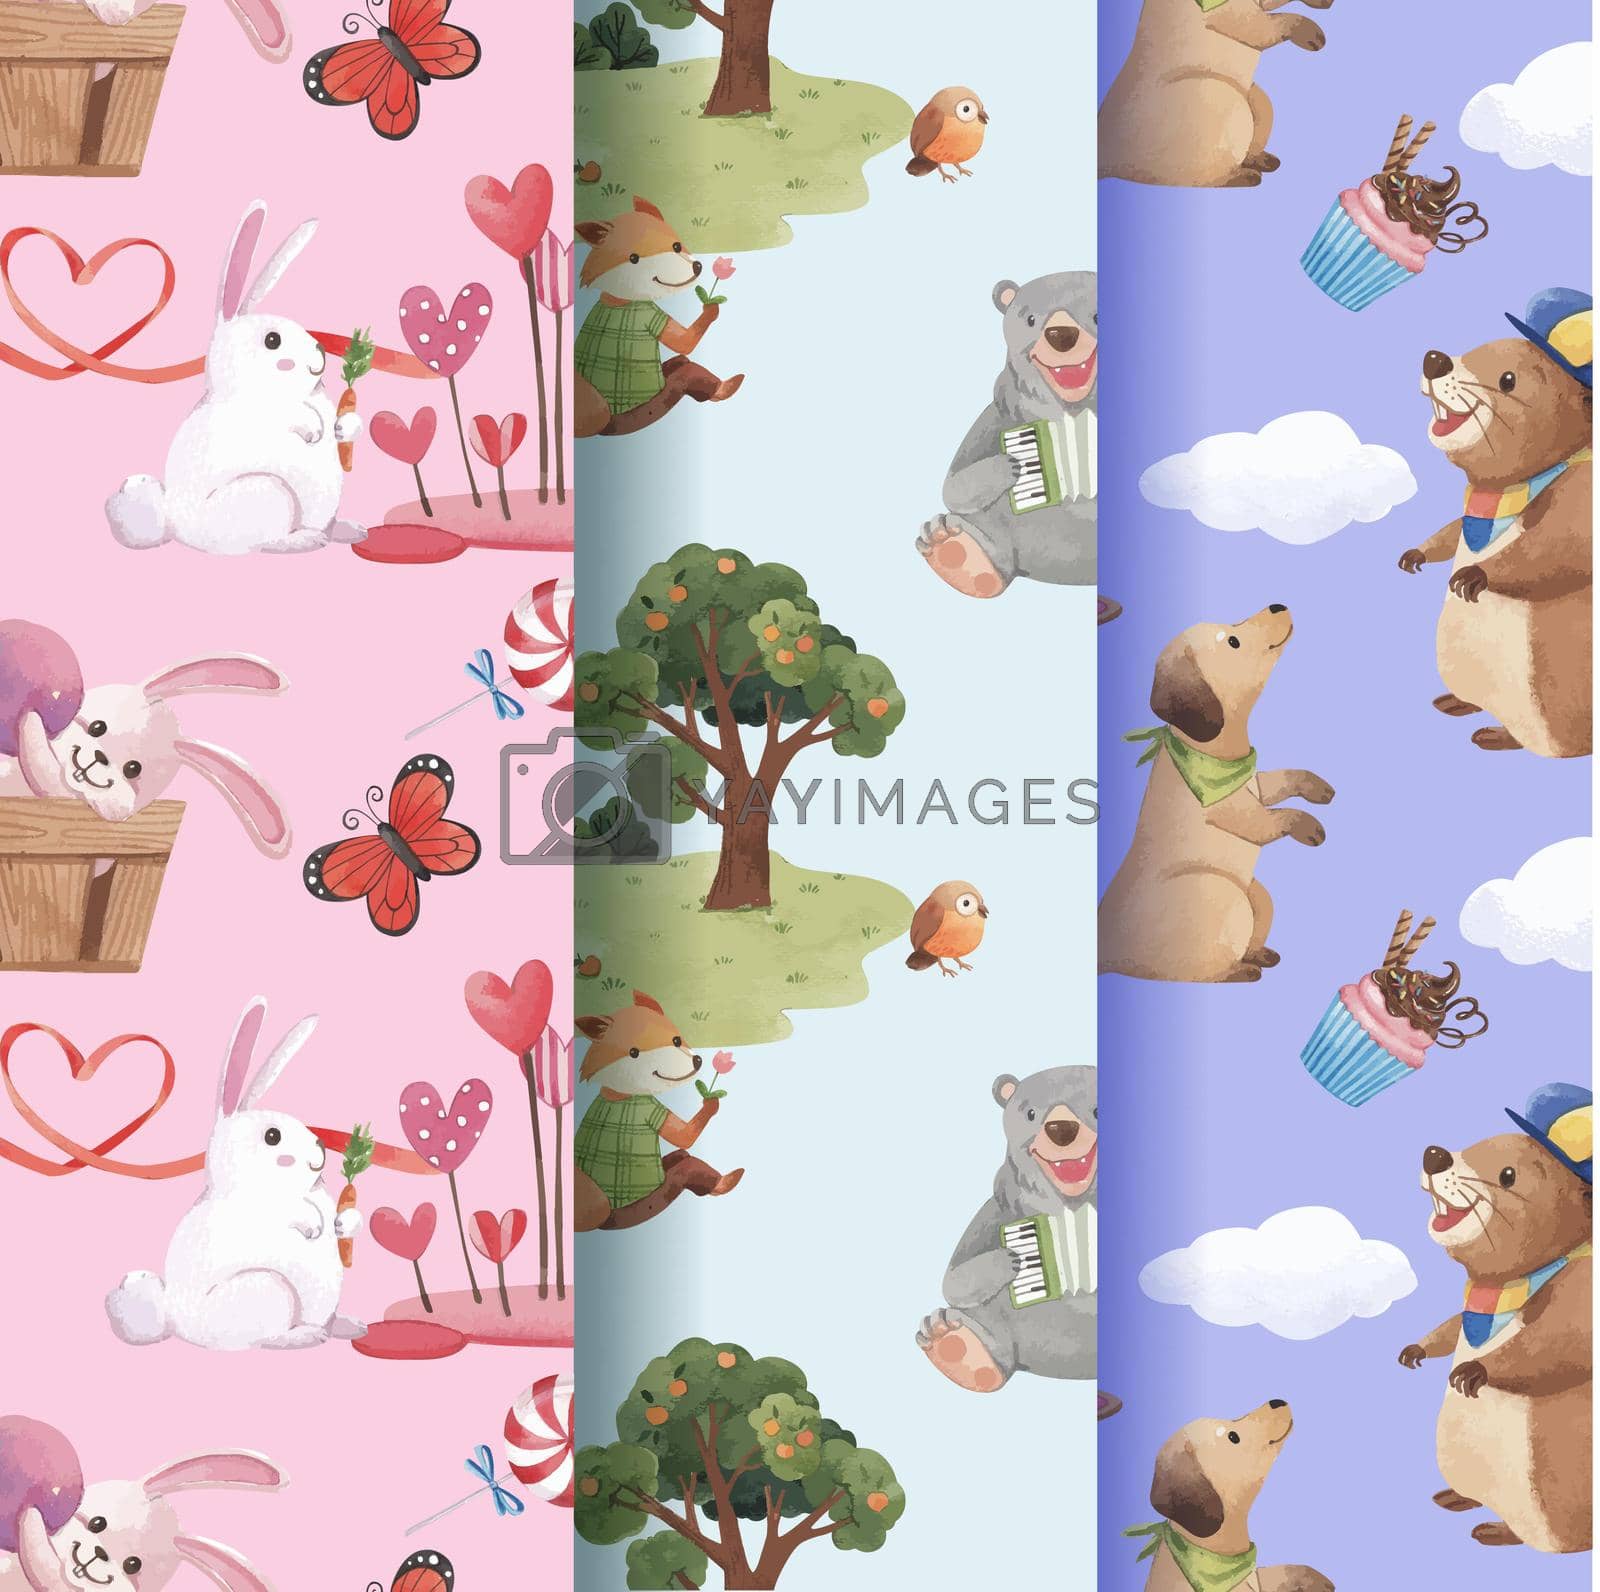 Pattern with happy animals concept design watercolor illustration
